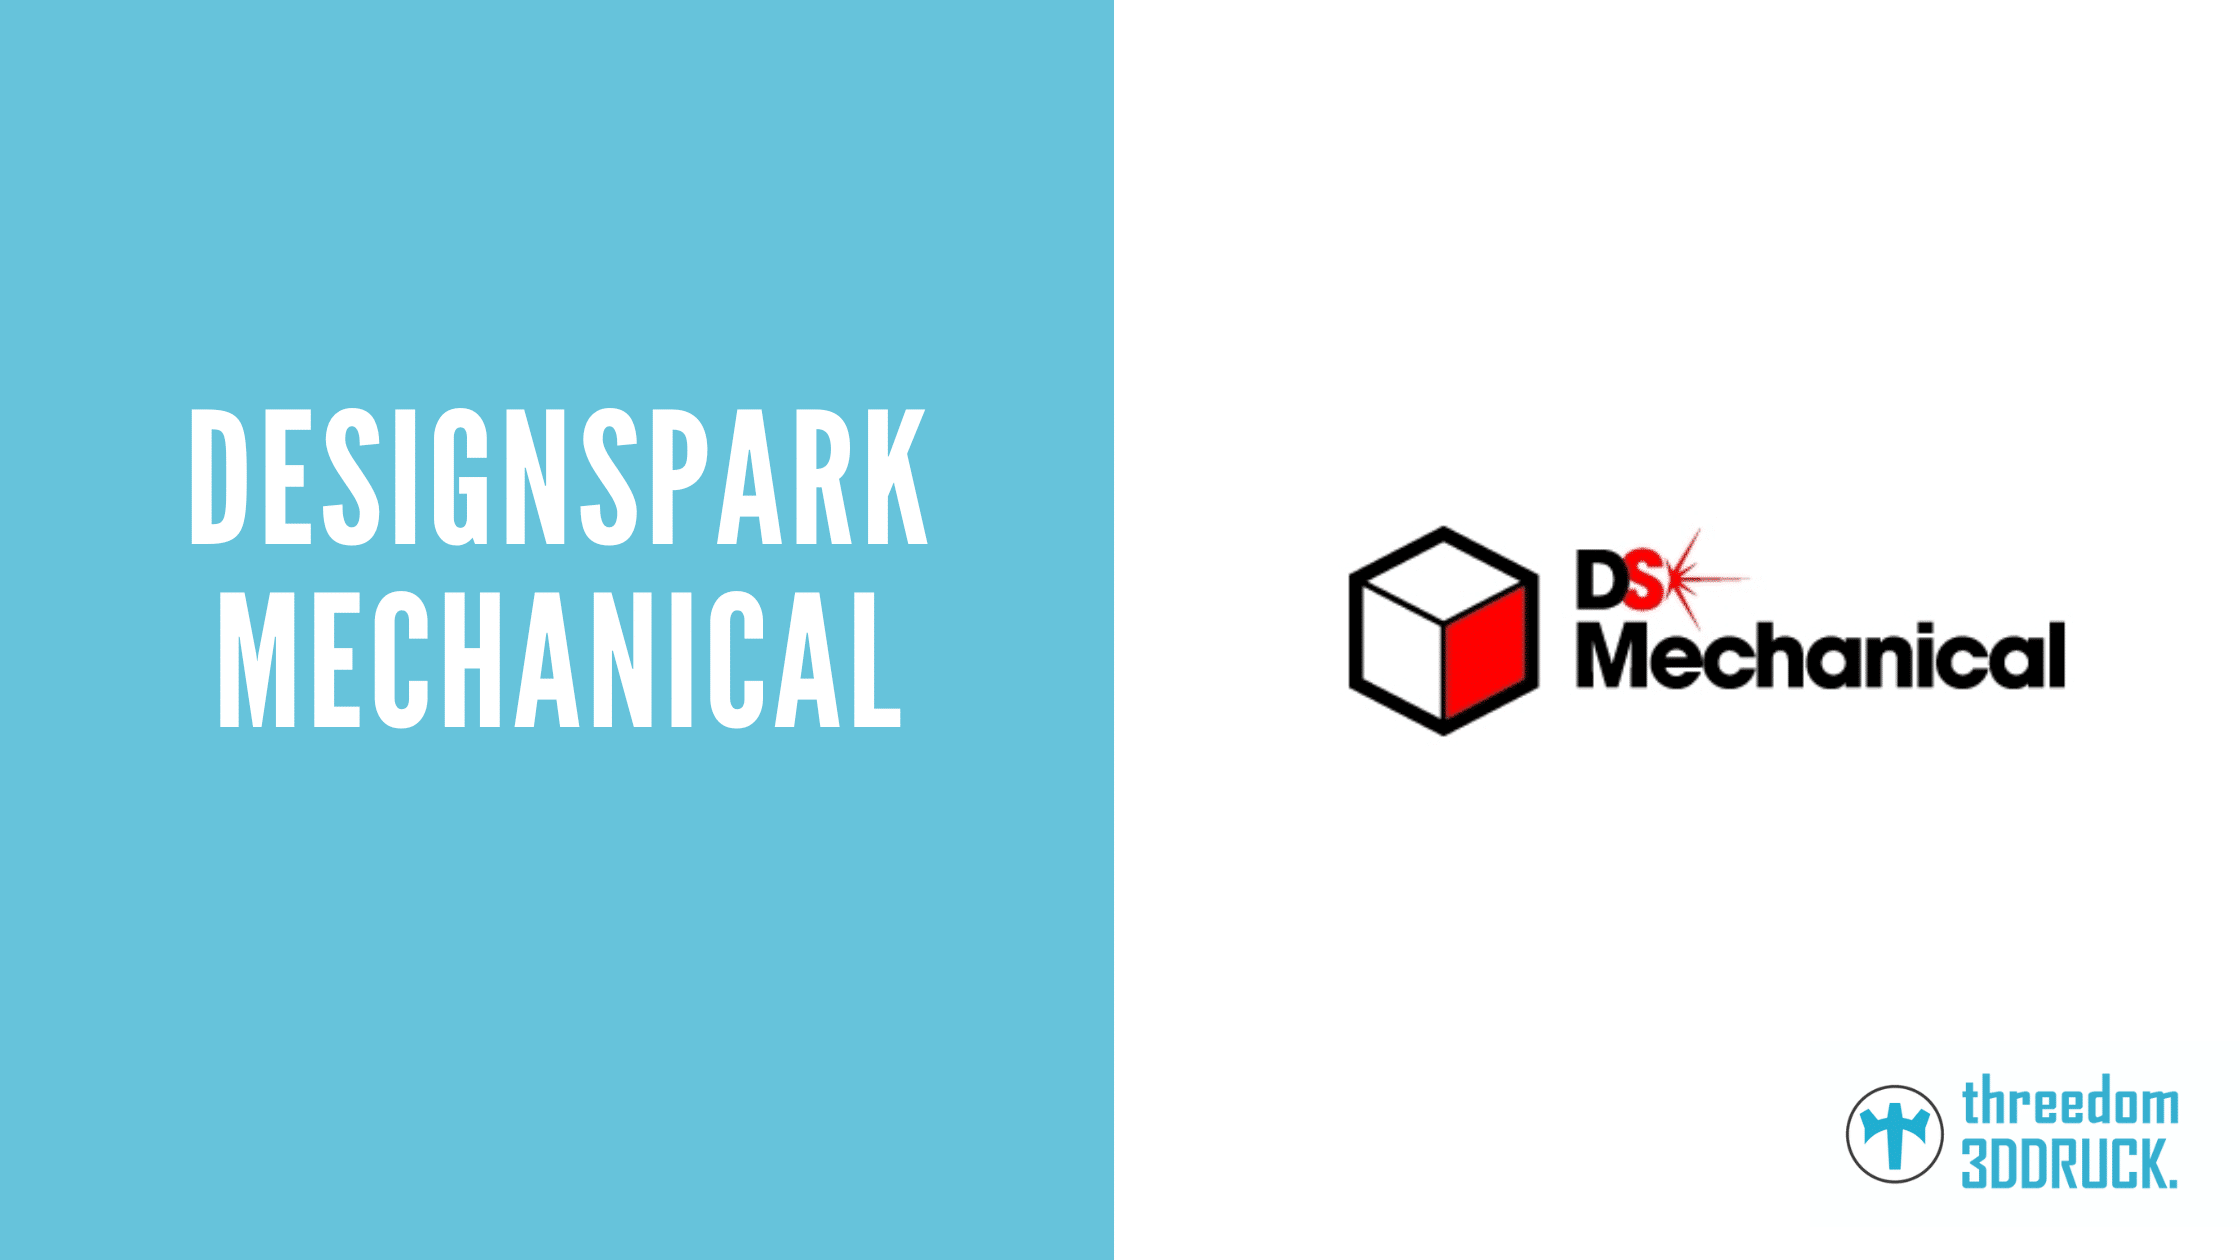 DesignSpark Mechanical: definition, functionality and scope